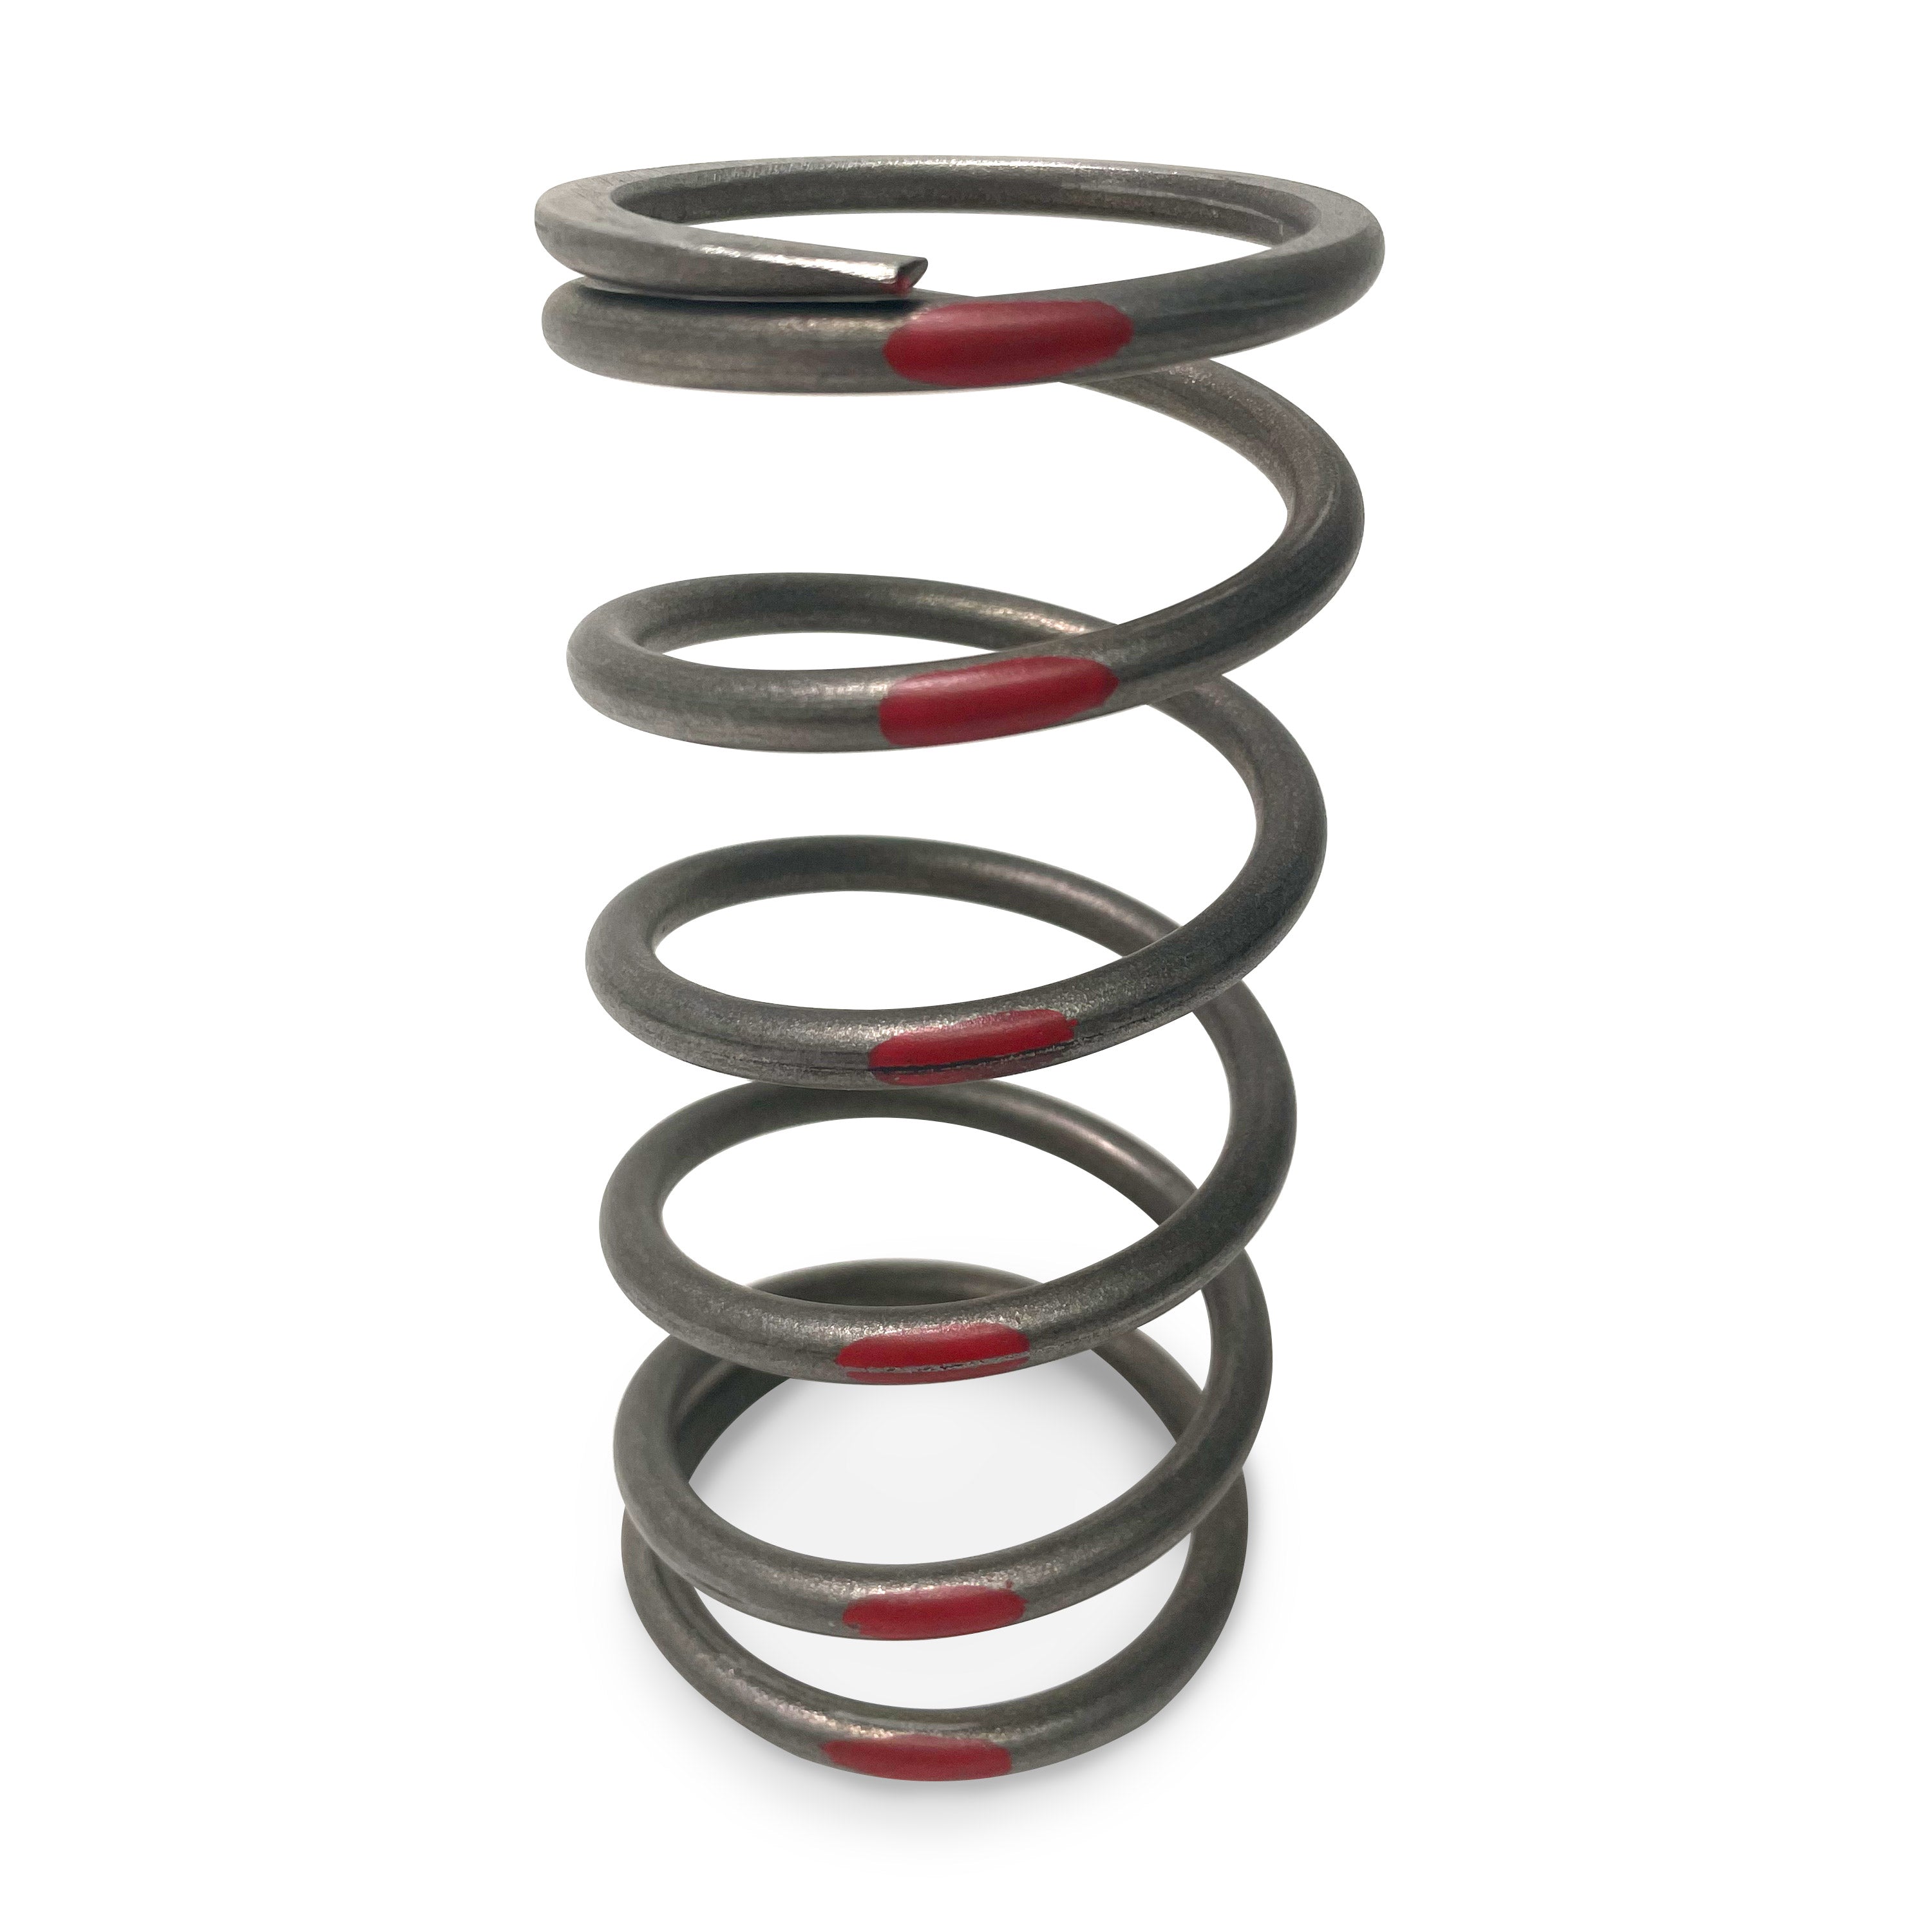 TAPP Primary Clutch Springs